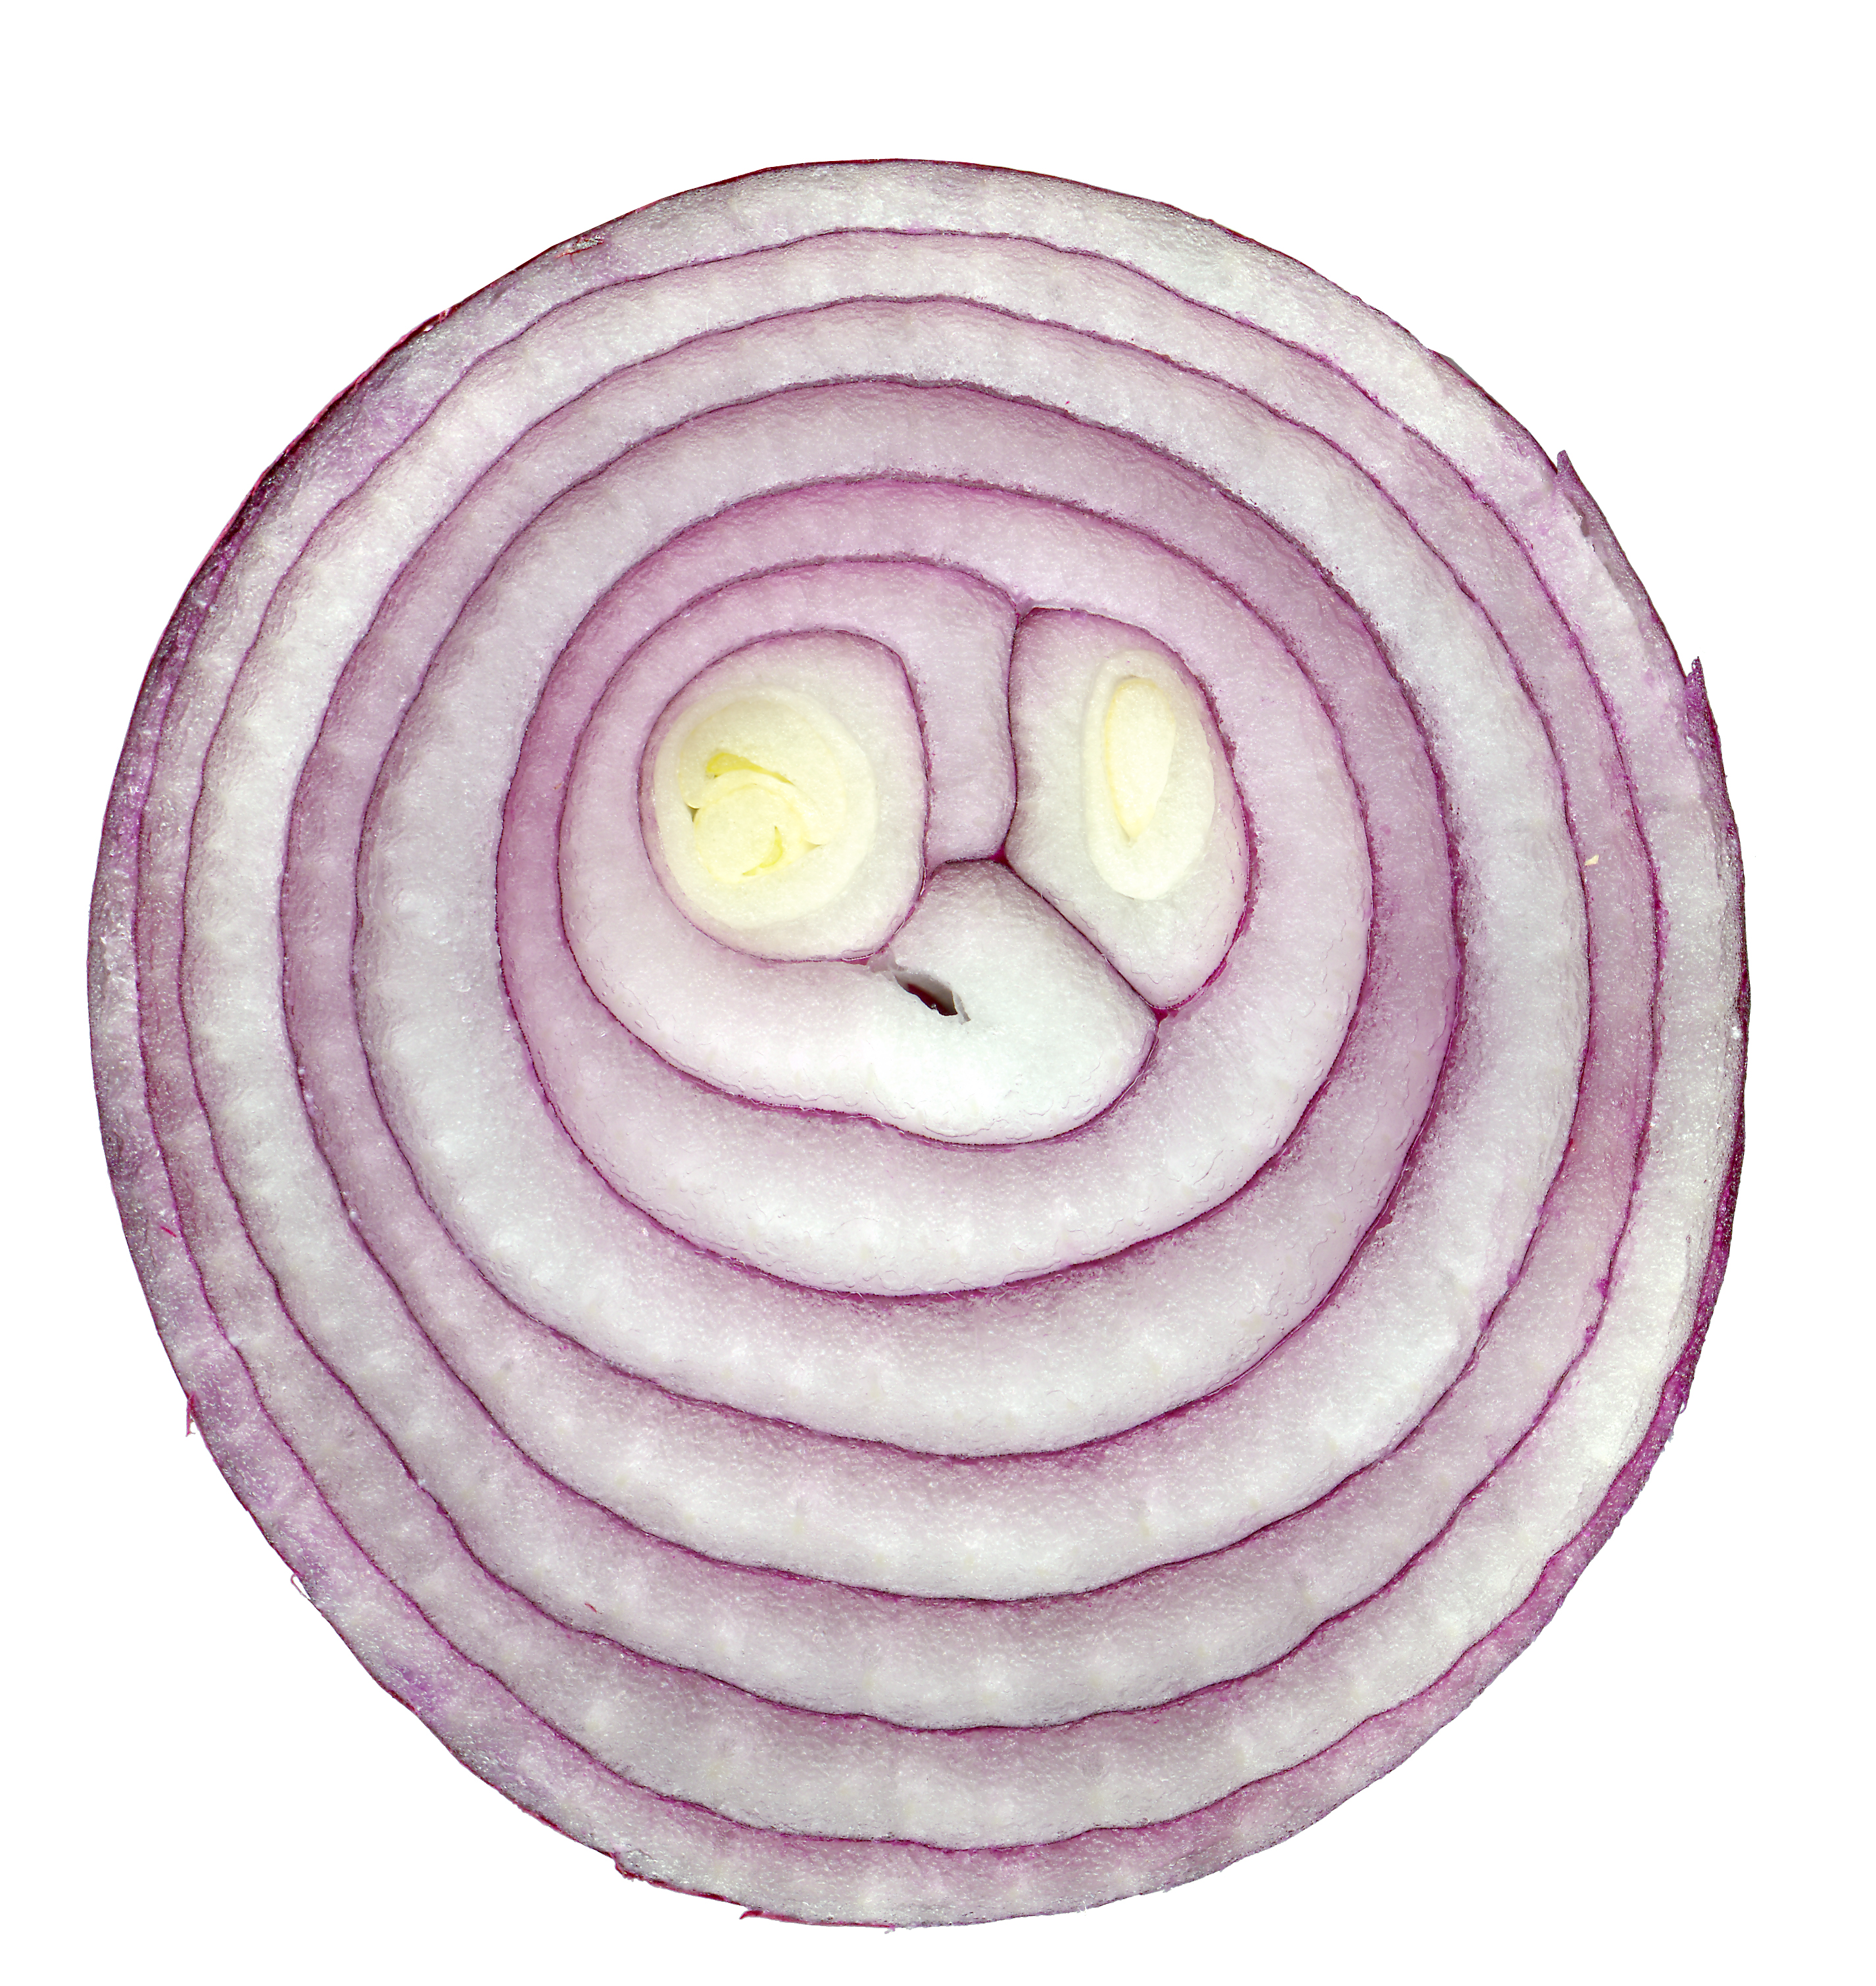 Red onion cross section 03